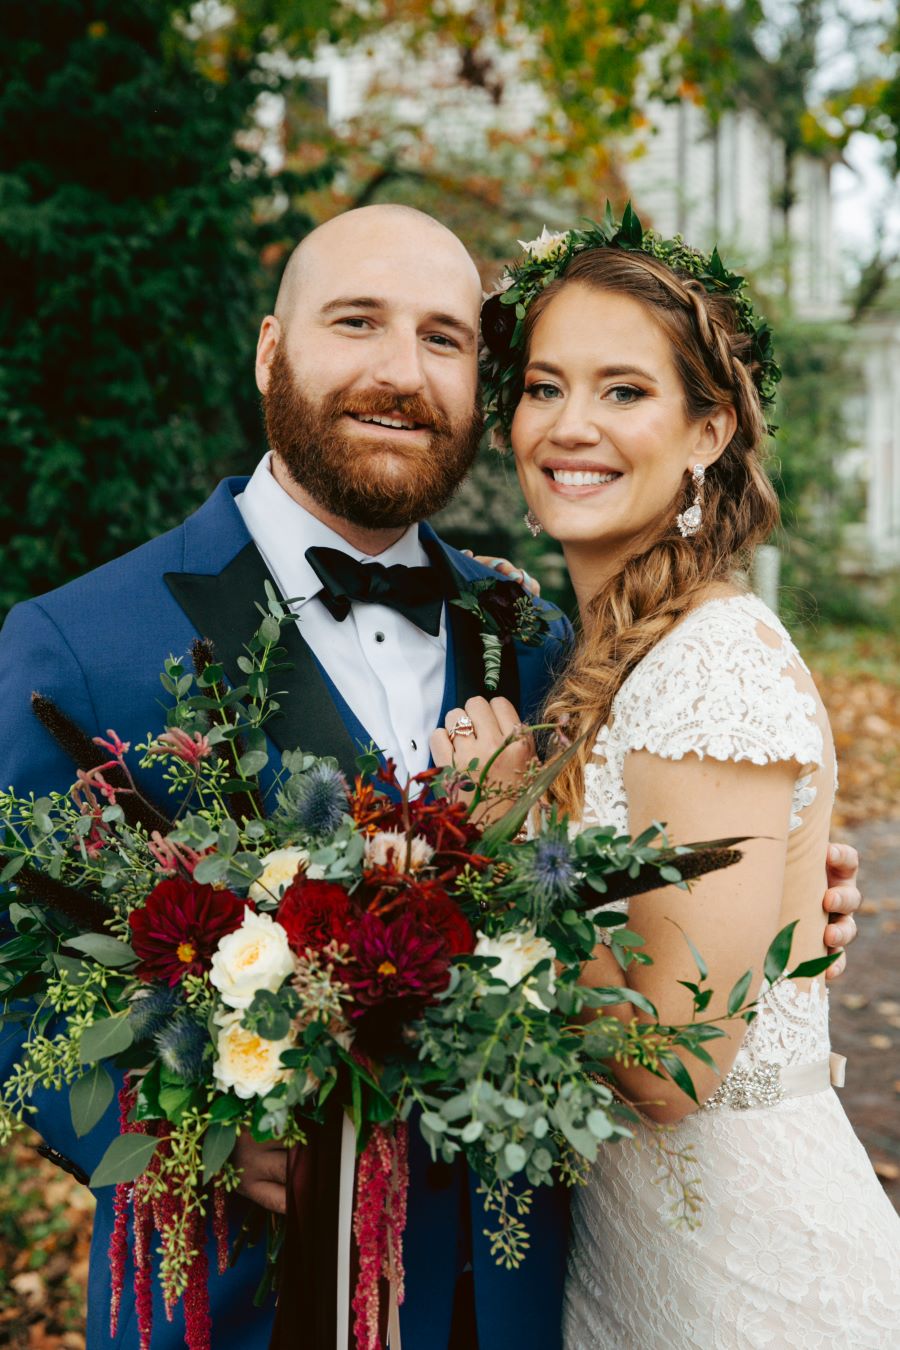 Bride and groom smiling for portraits / earthy / fall / October / burgundy